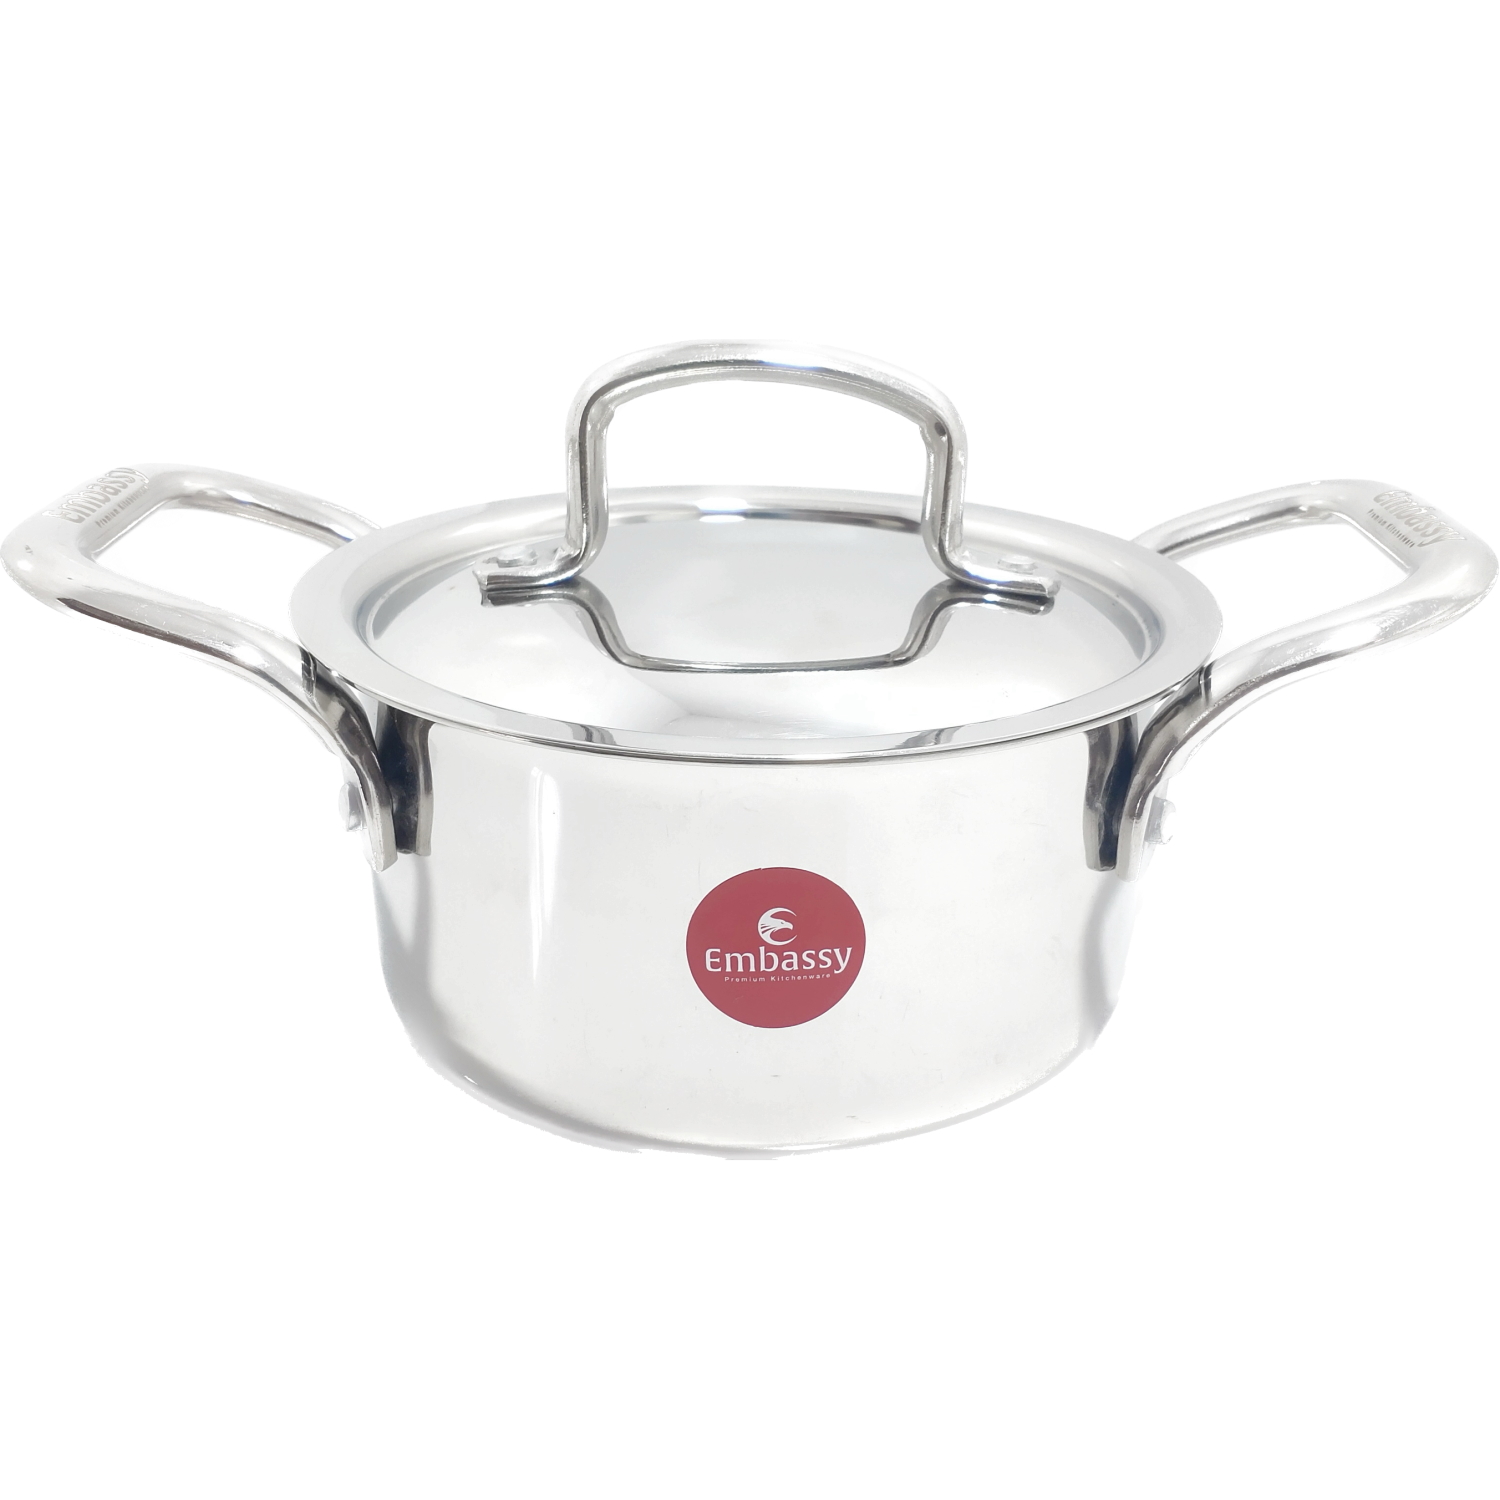 Embassy Stainless Steel Thickply Casserole with Lid Size 12 - 16cm